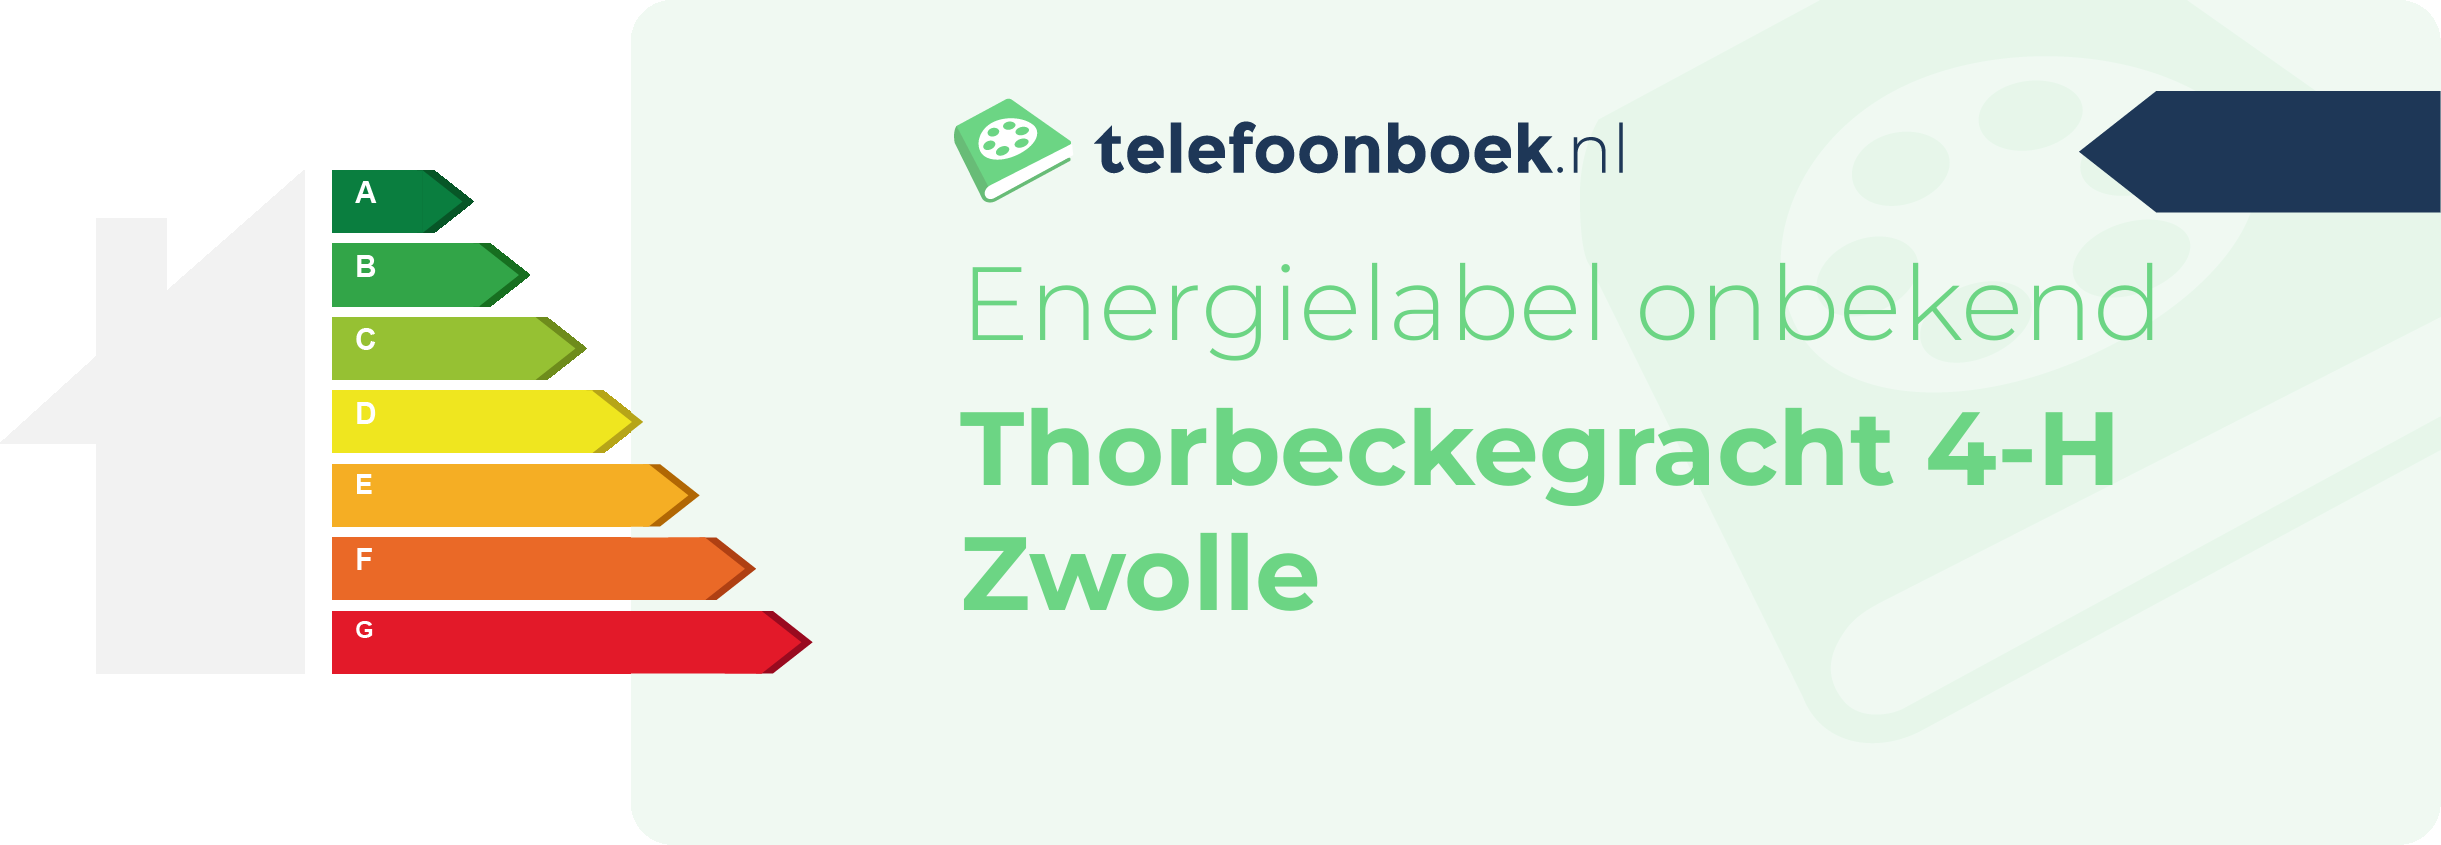 Energielabel Thorbeckegracht 4-H Zwolle